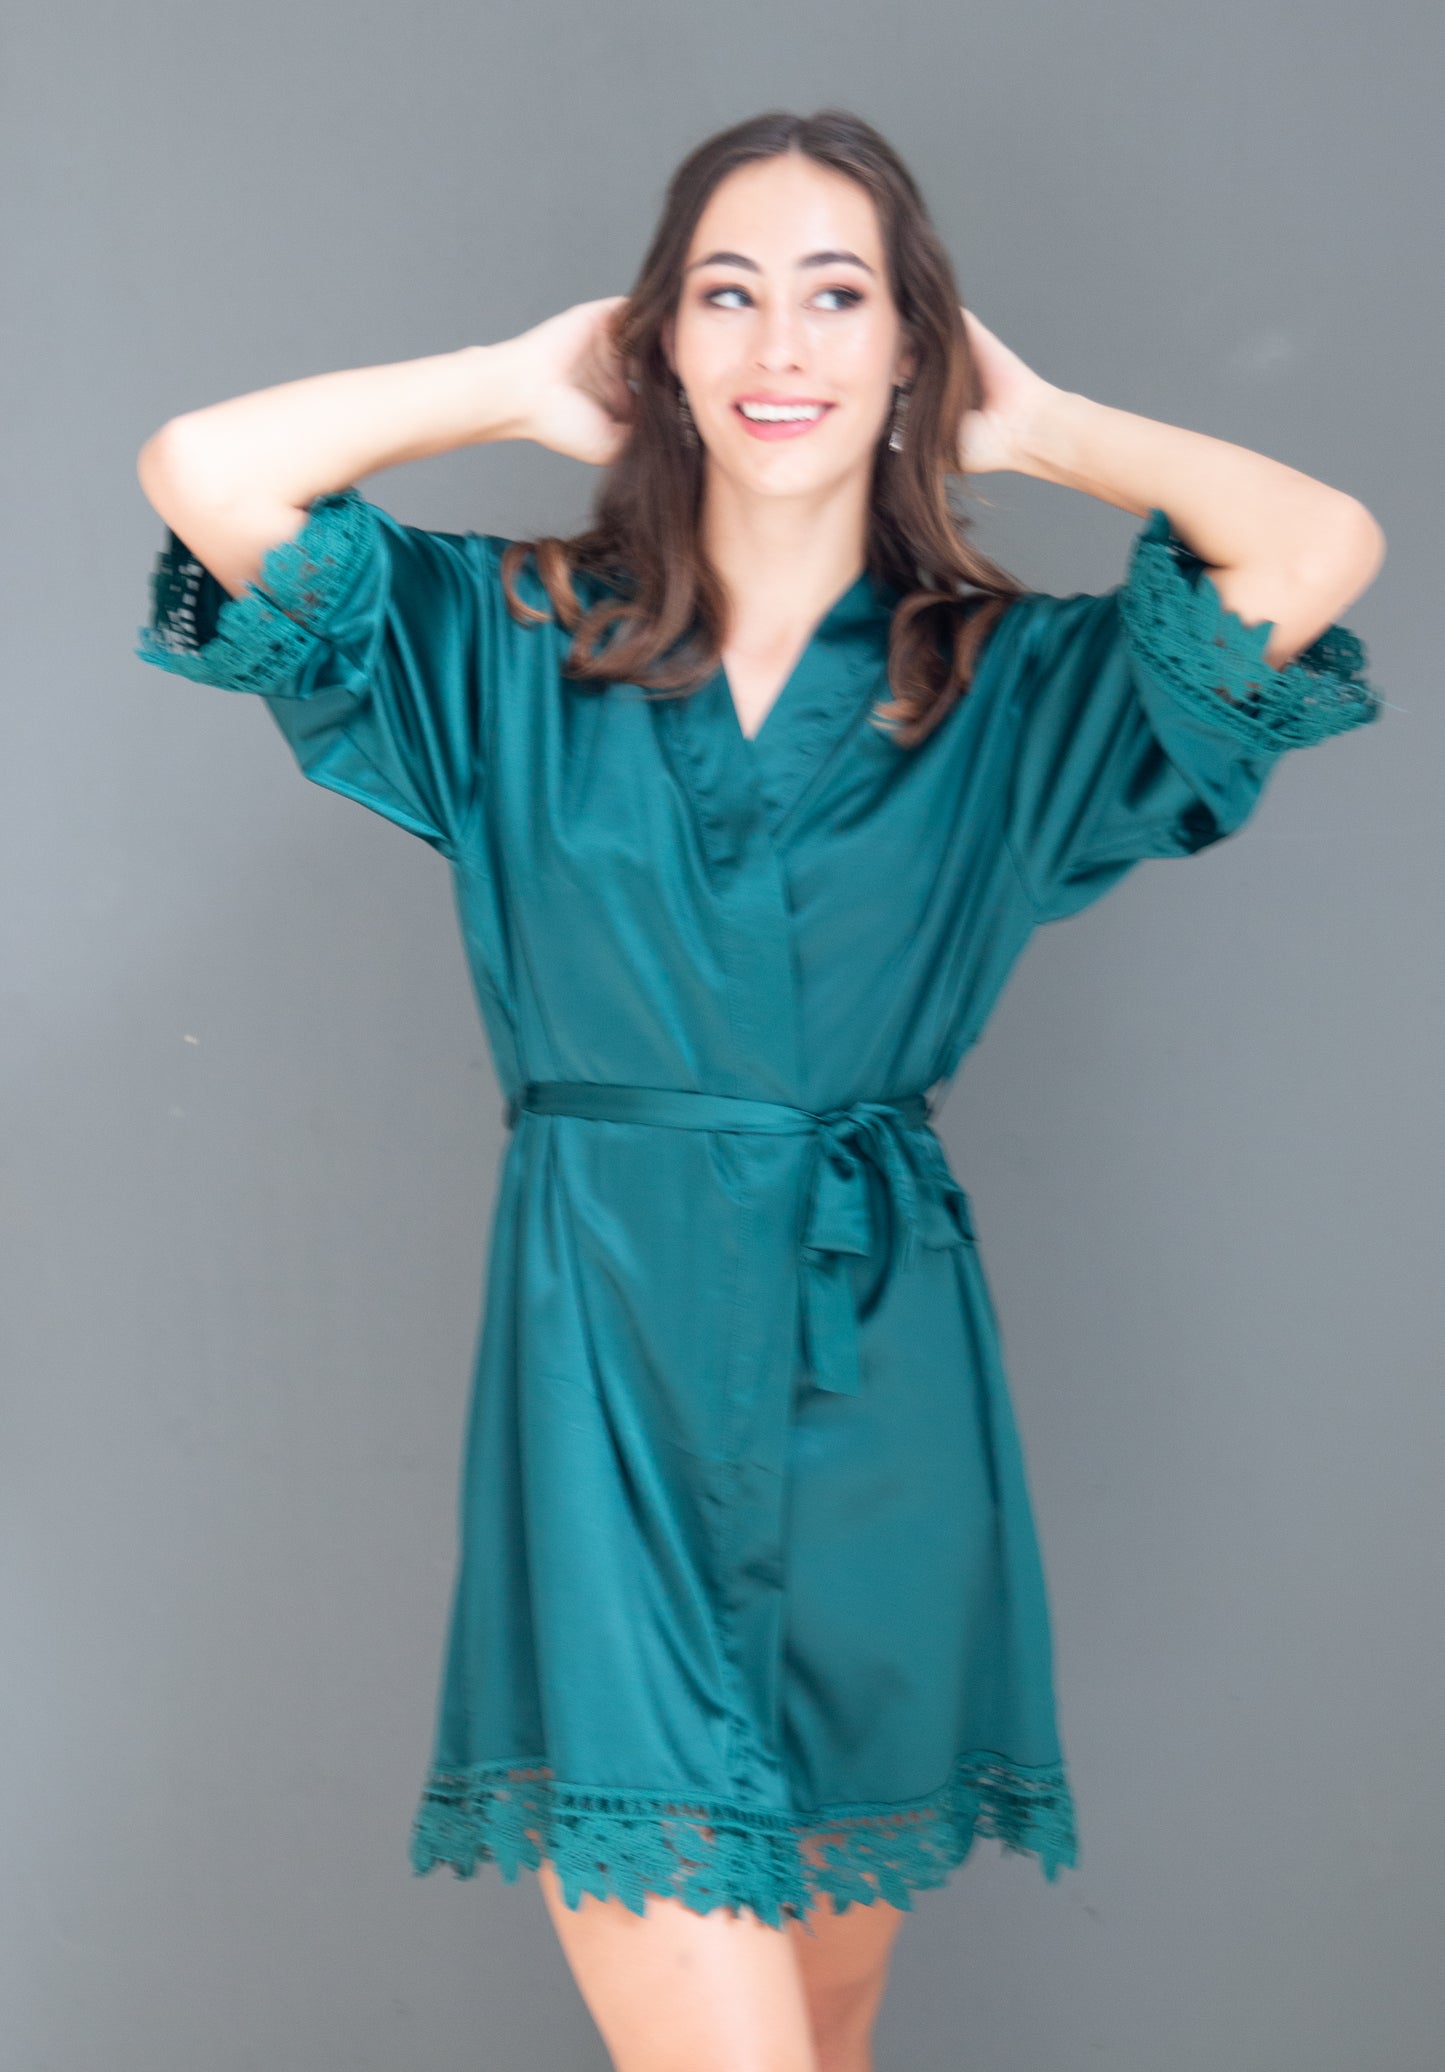 Model wearing an emerald green satin gown with lace trim in the same colour